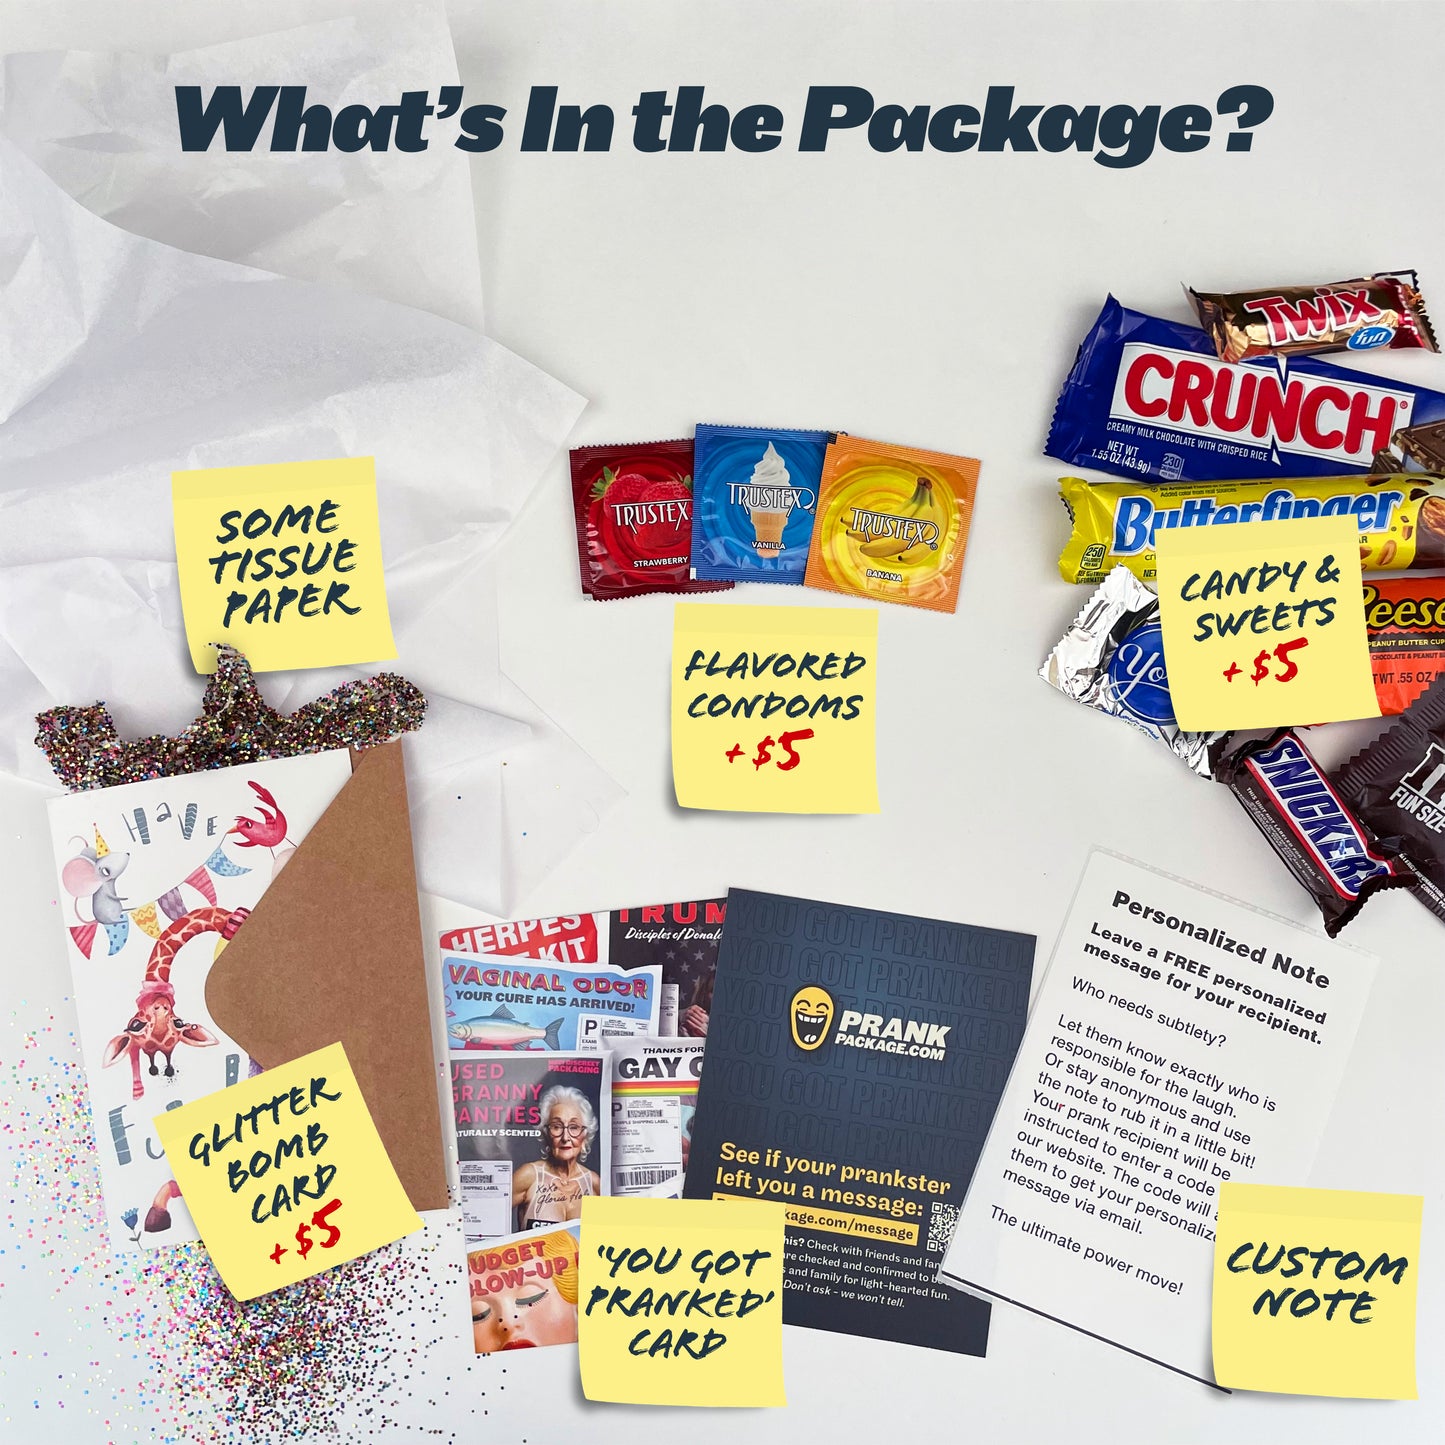 What's included in the prank package? Some tissue paper, an optional personalized note, a glitter bomb greeting card for $5 extra, a 'You Got Pranked' card, optional candy for $5 extra, and optional flavored condoms for $5 extra.